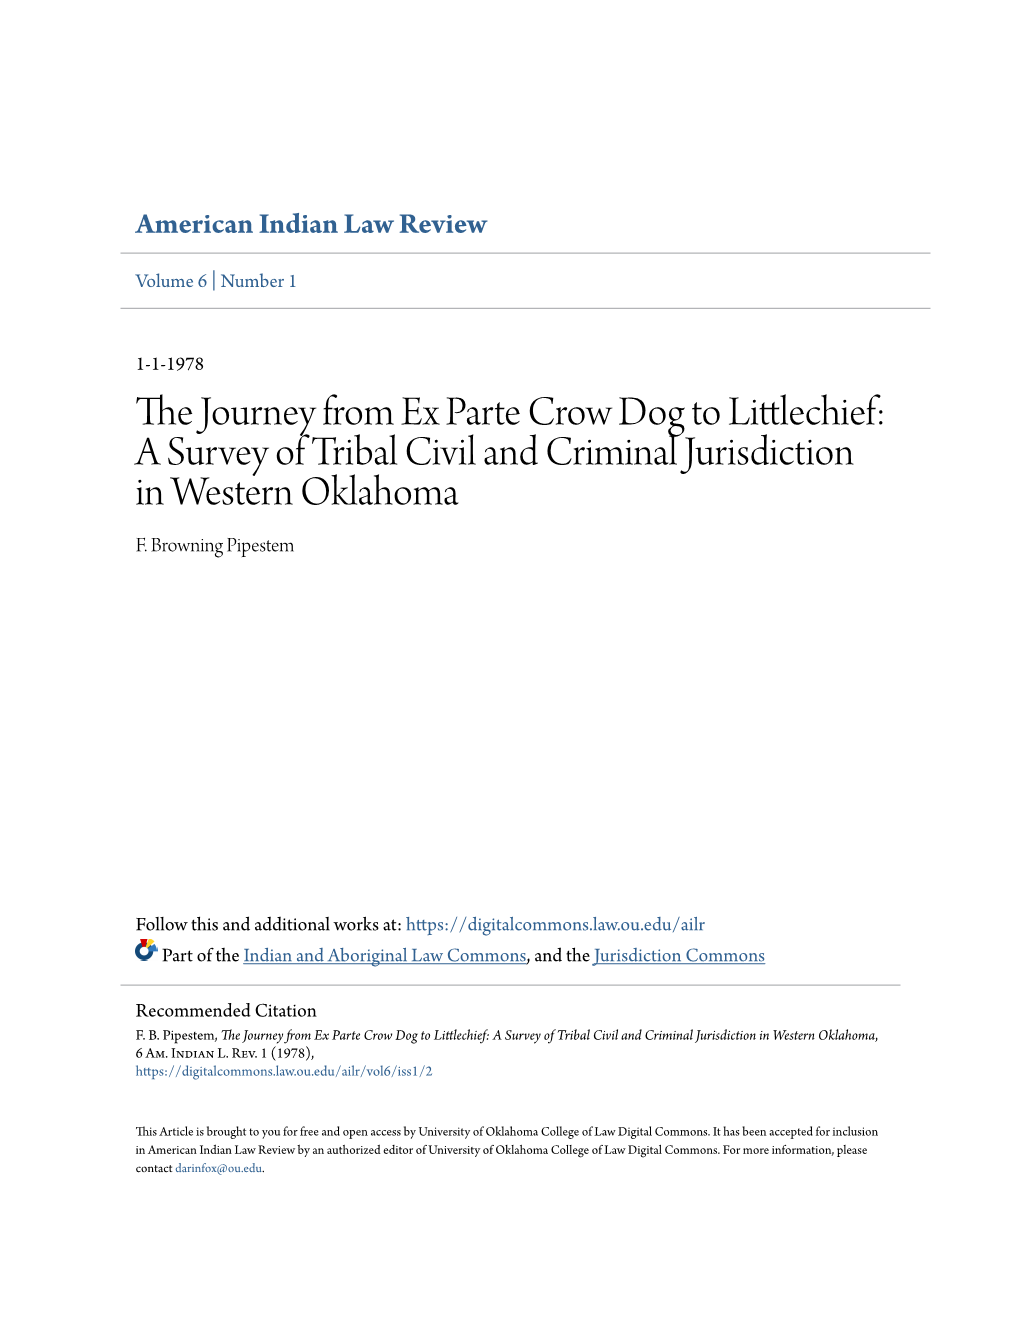 The Journey from Ex Parte Crow Dog to Littlechief: a Survey of Tribal Civil and Criminal Jurisdiction in Western Oklahoma, 6 Am